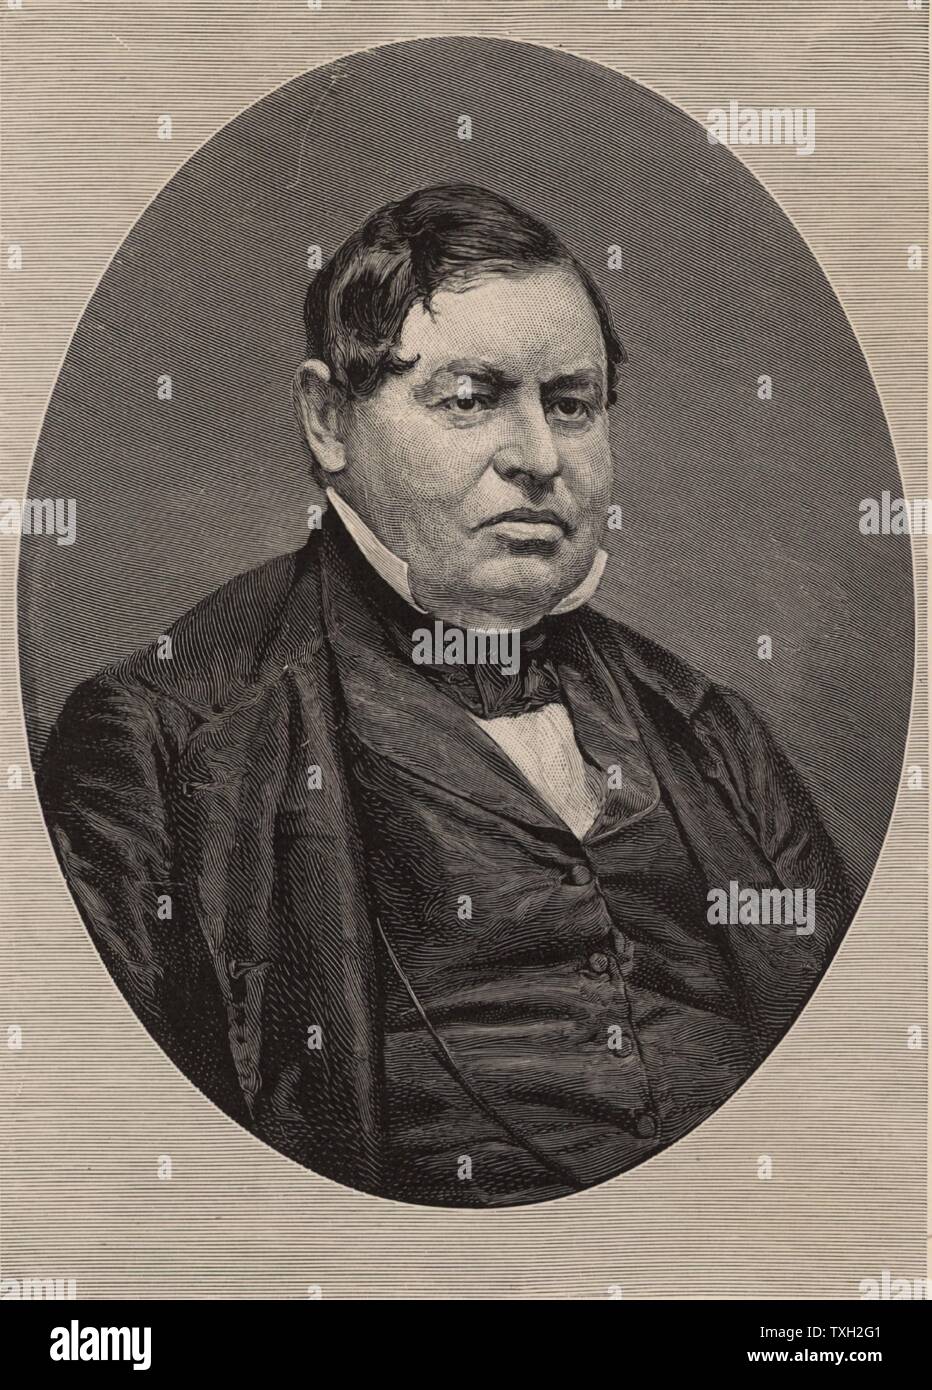 Sears Cook Walker (1805-1953) American astronomer, mathematician and classicist, born at Wilmington, Massachusetts.  Engraving 1896. Stock Photo